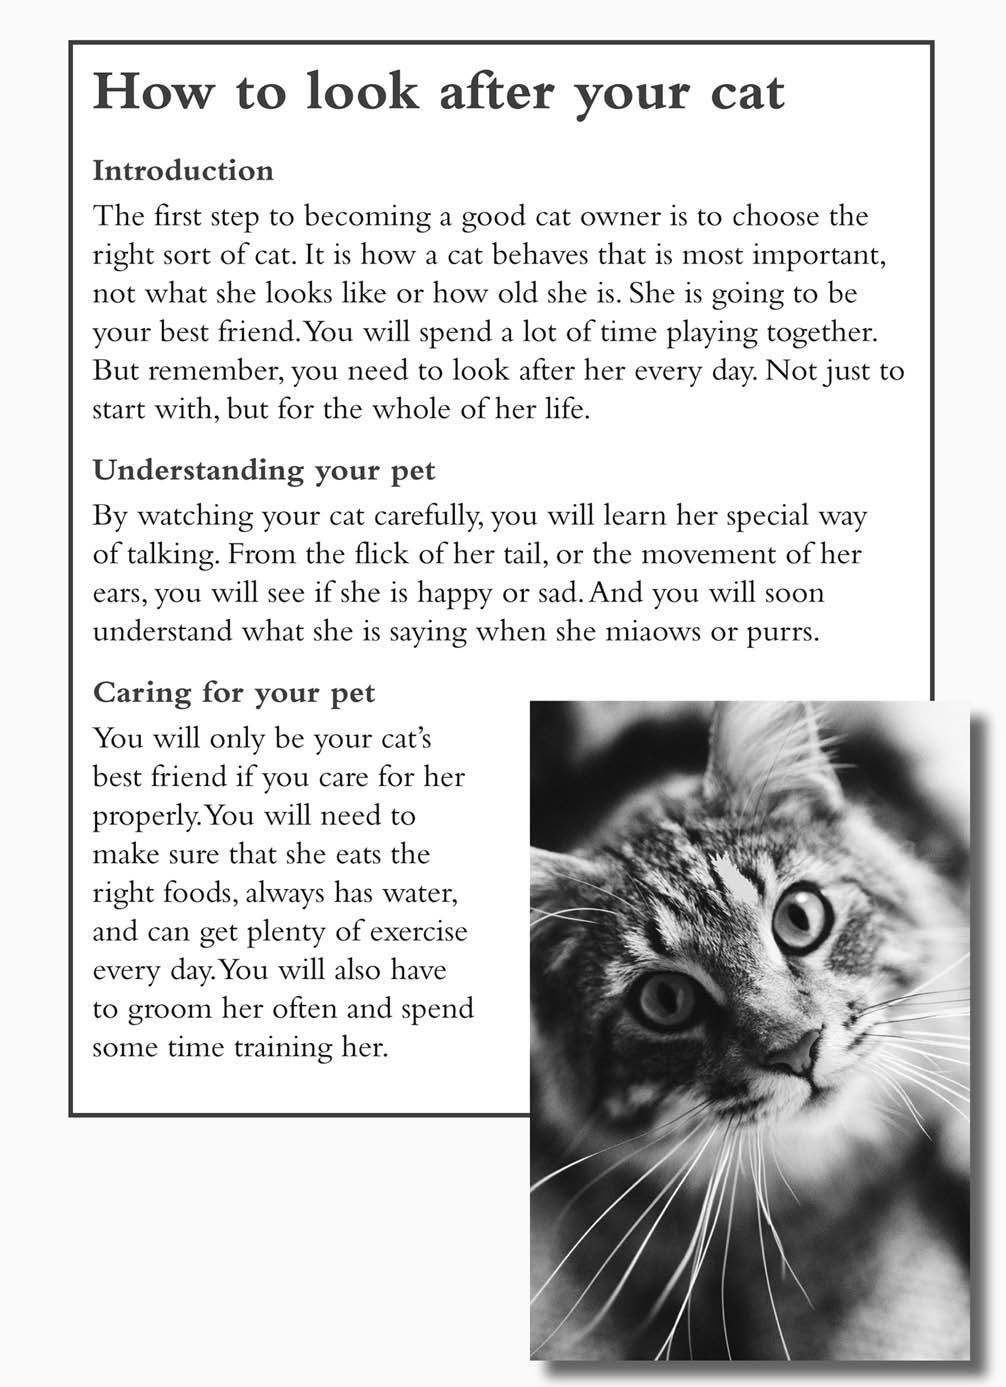 Read How to look after your cat and answer questions 7 to 11 This